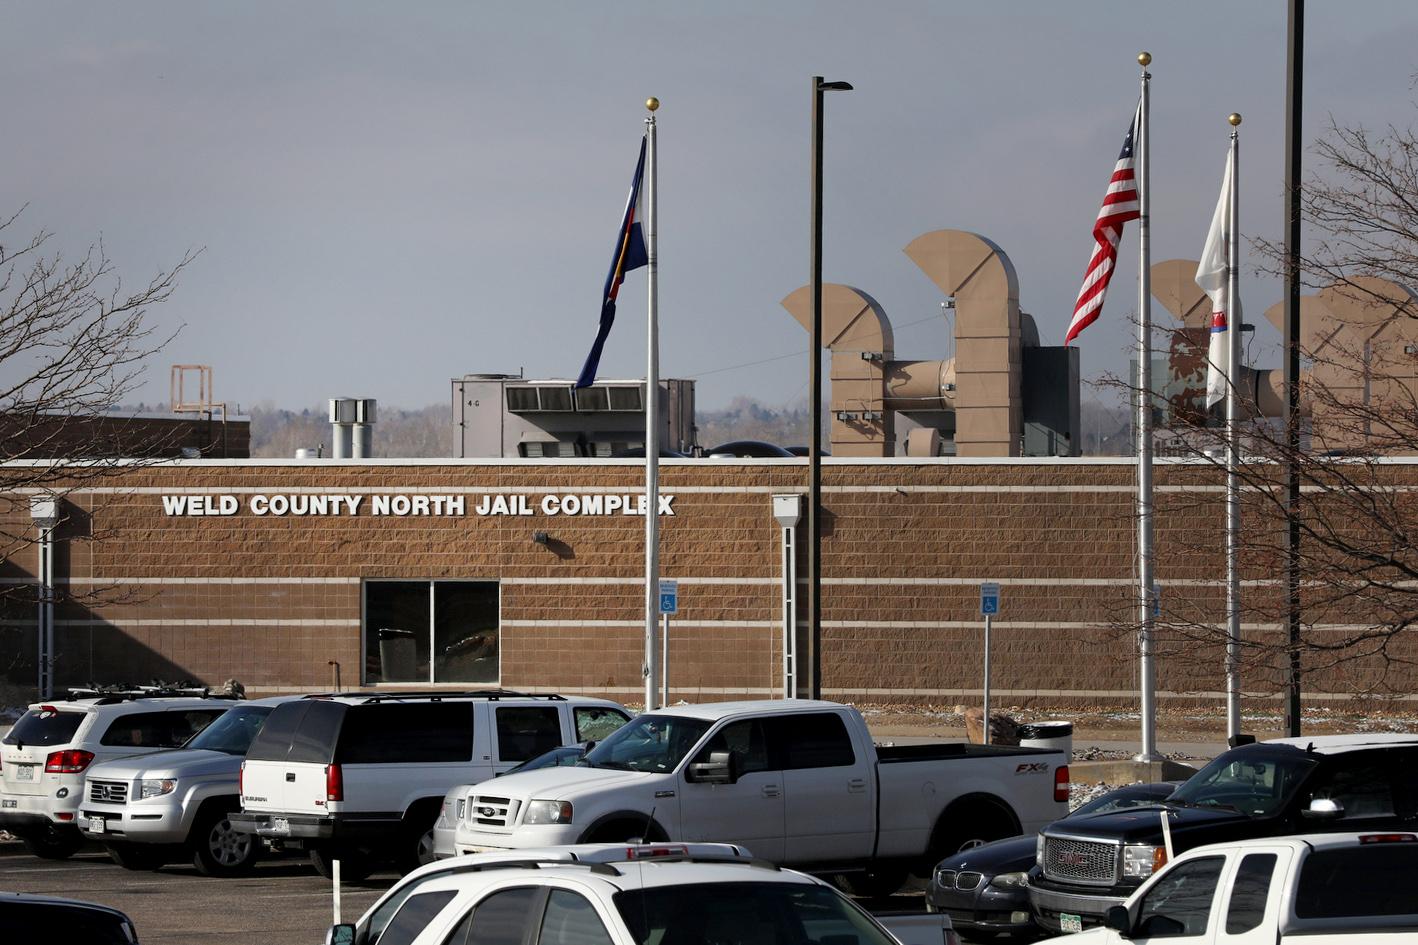 Weld County North Jail Complex in Greeley